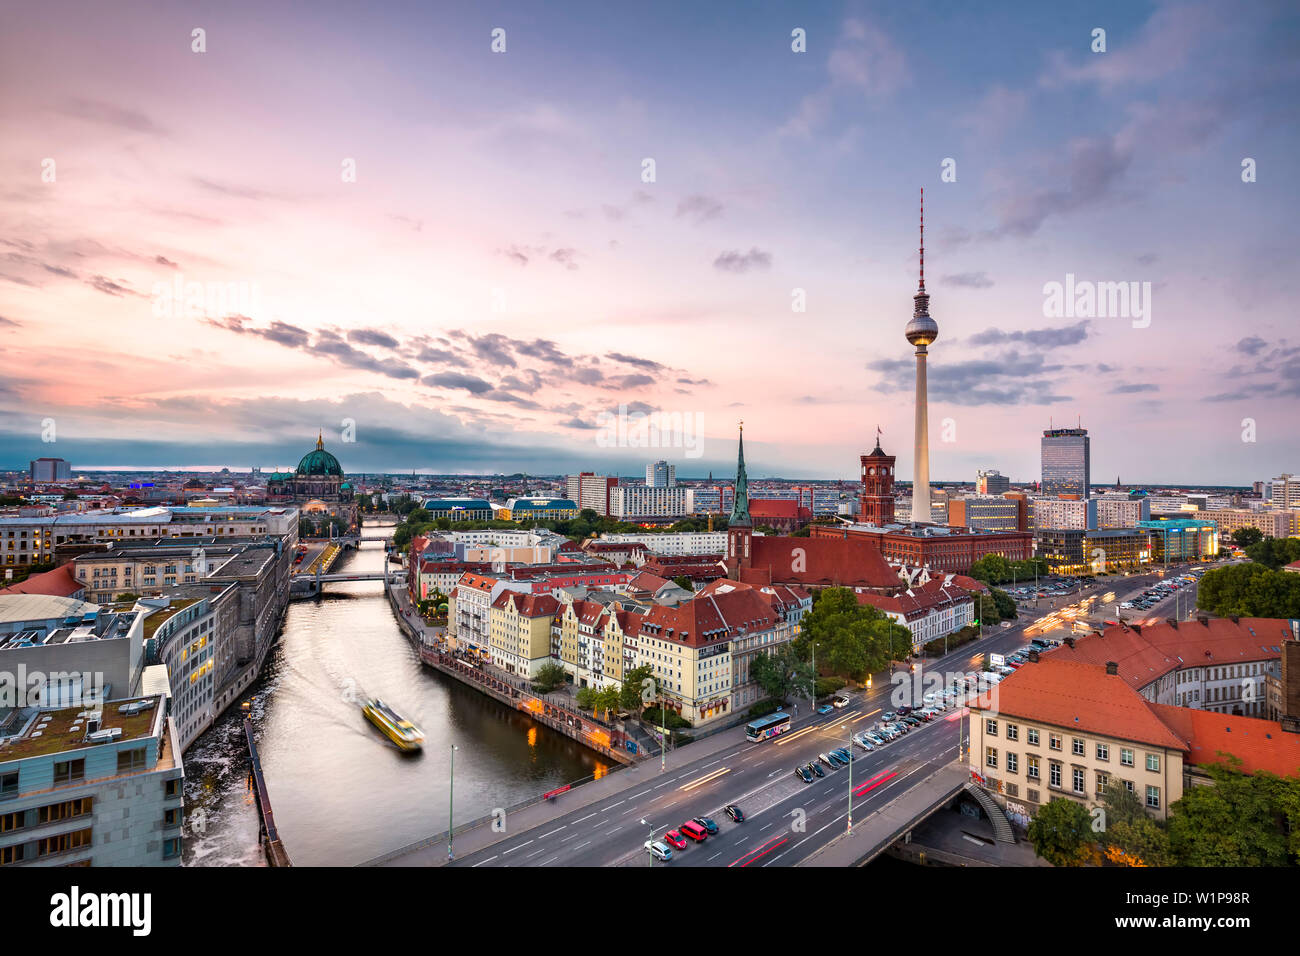 Overview, Berlin Dom, Spree River, Nikolai Quarter and Television tower, Berlin, Germany Stock Photo